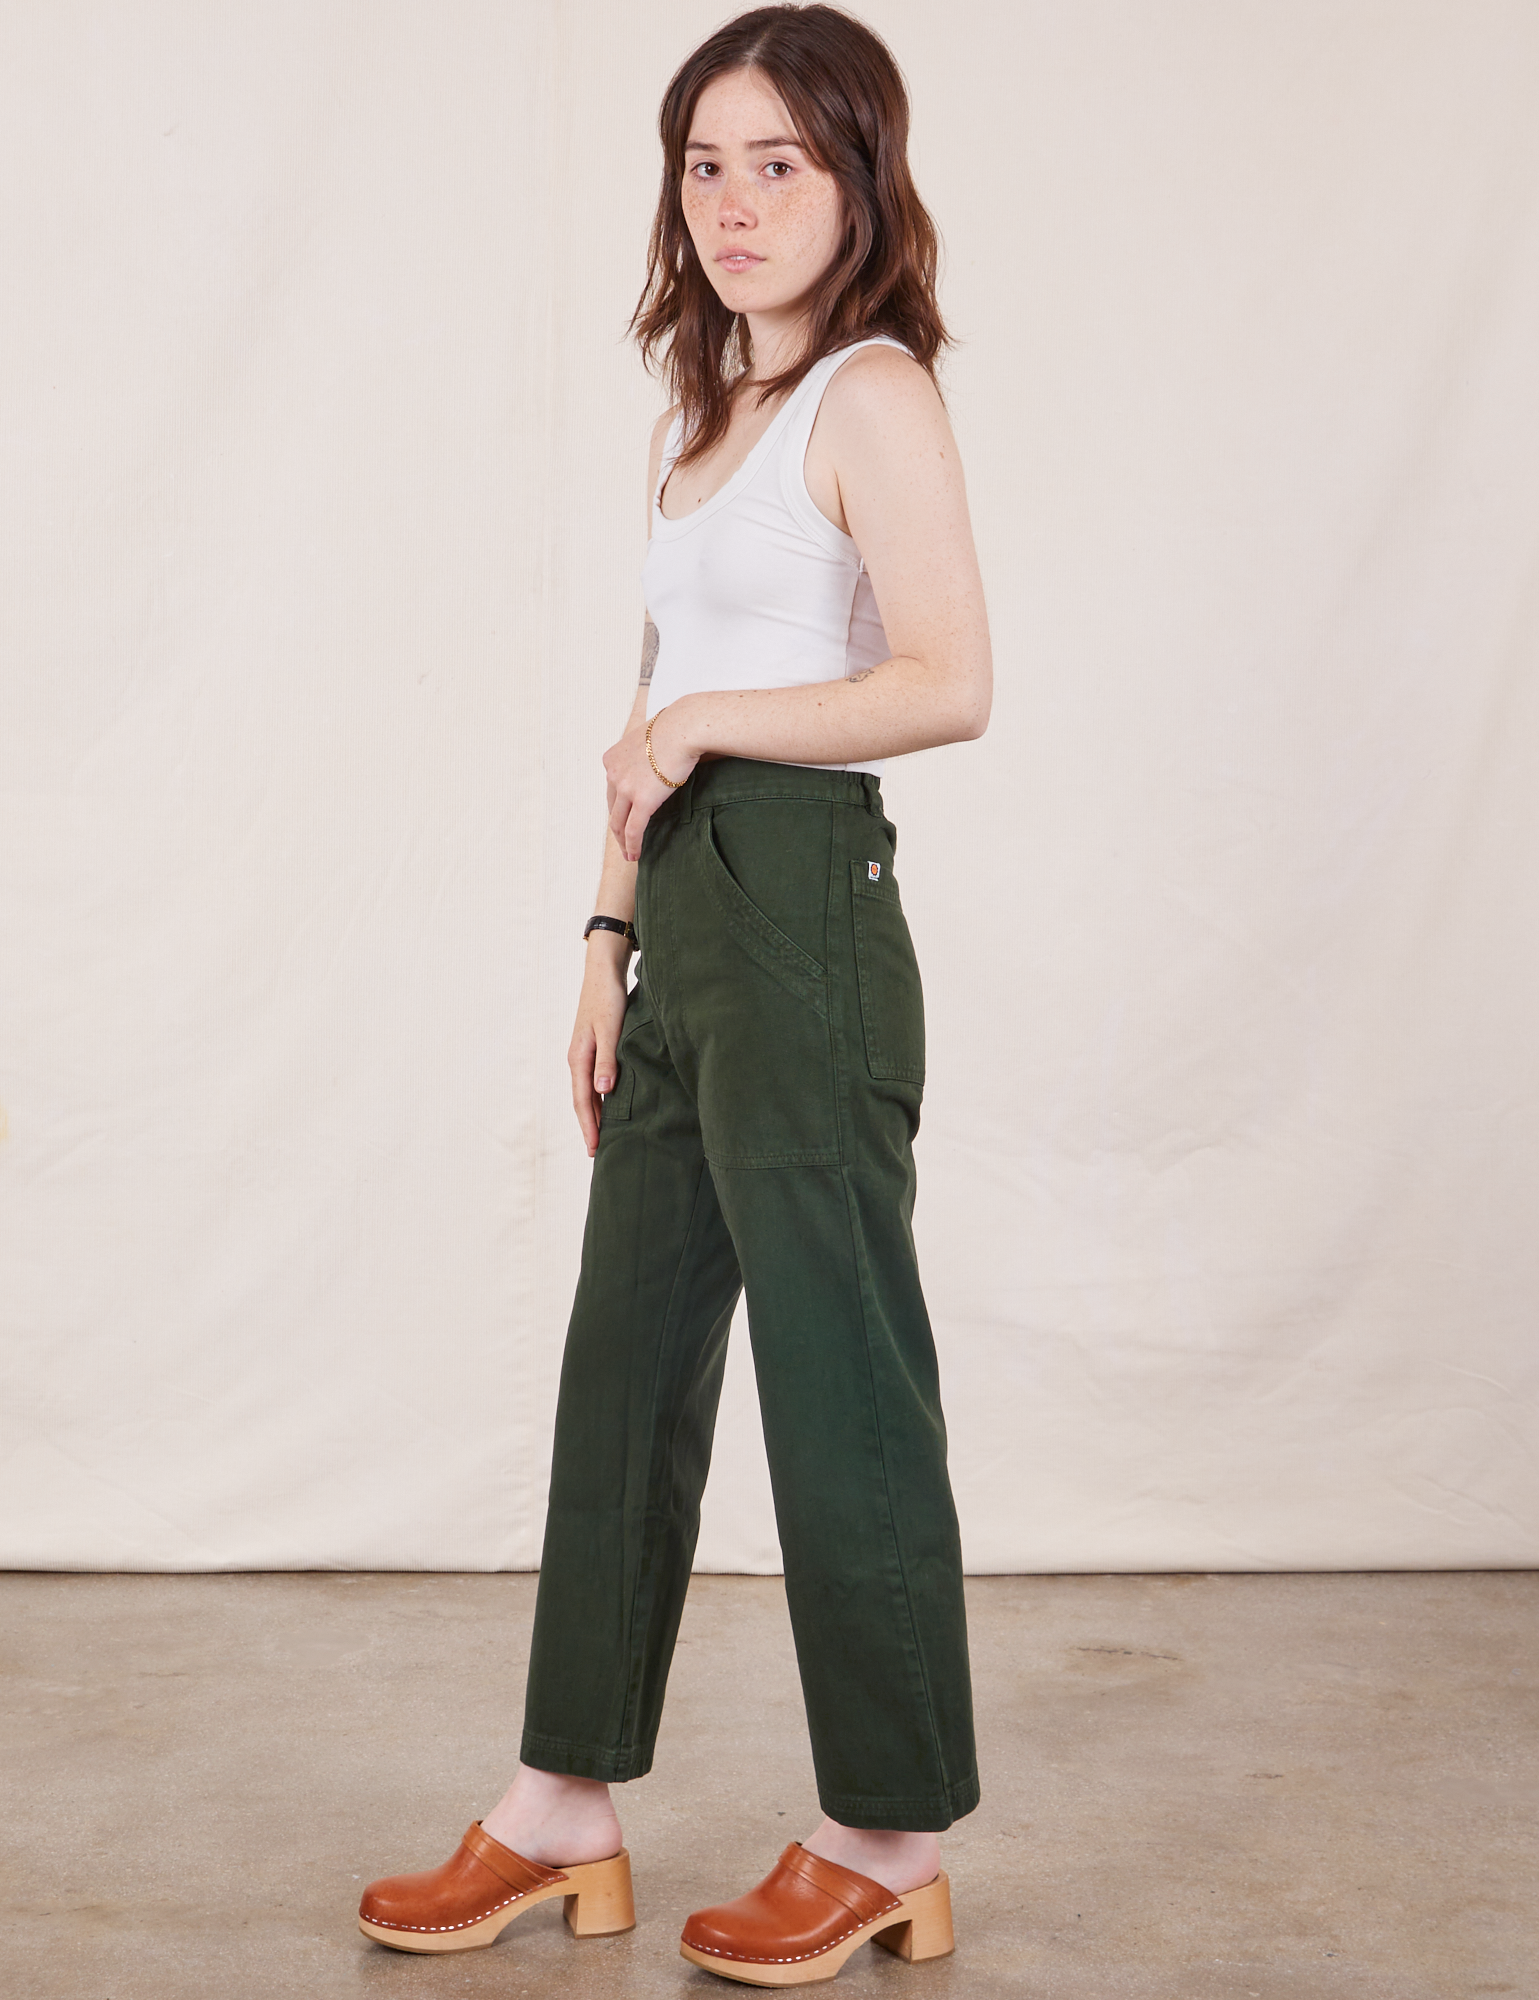 Side view of Petite Work Pants in Swamp Green and Cropped Tank Top in vintage tee off-white on Hana